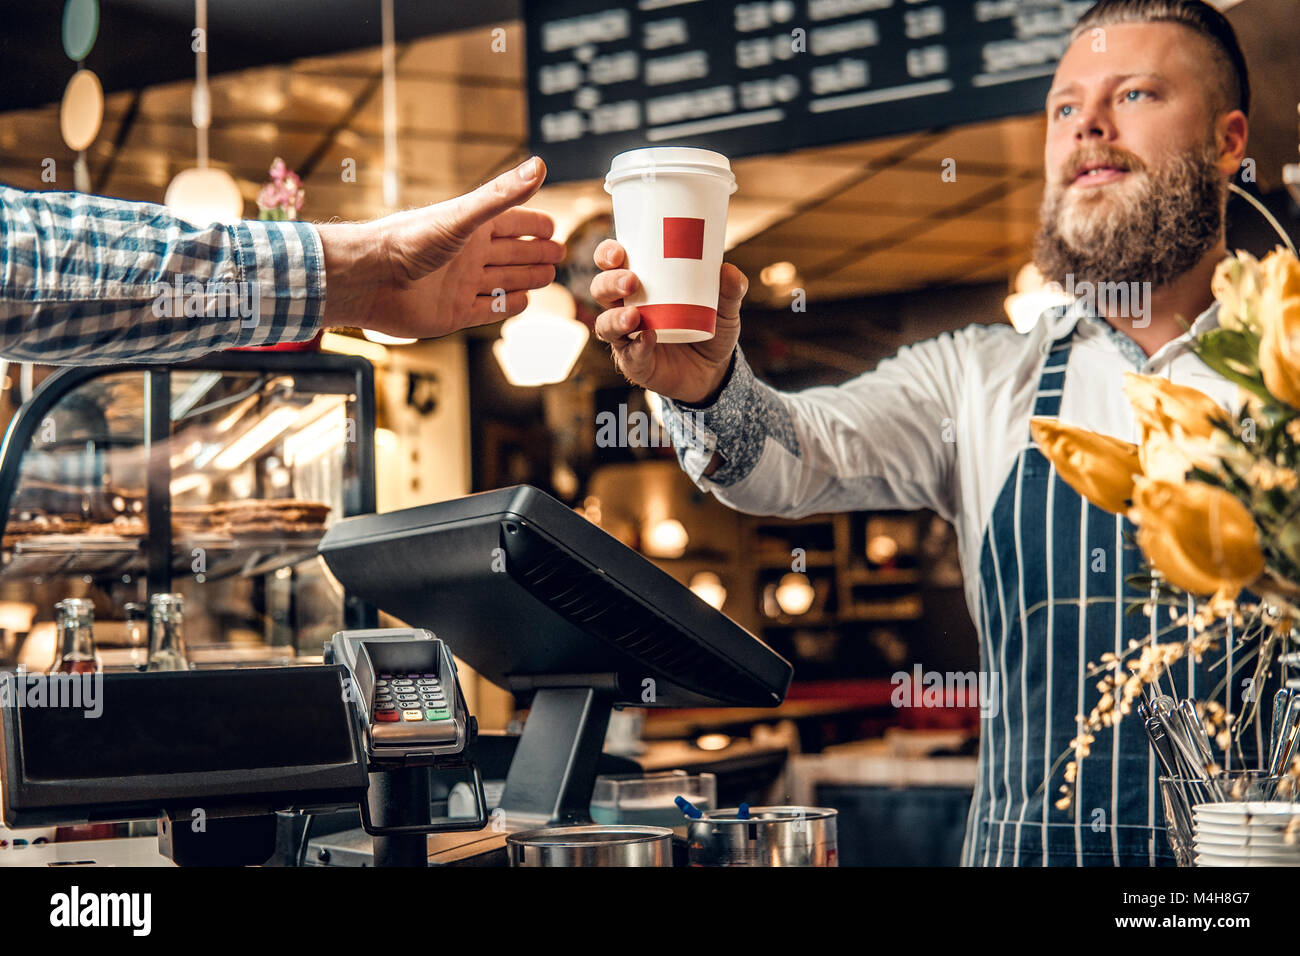 https://c8.alamy.com/comp/M4H8G7/positive-bearded-barista-male-selling-coffee-to-a-consumer-in-a-coffee-M4H8G7.jpg